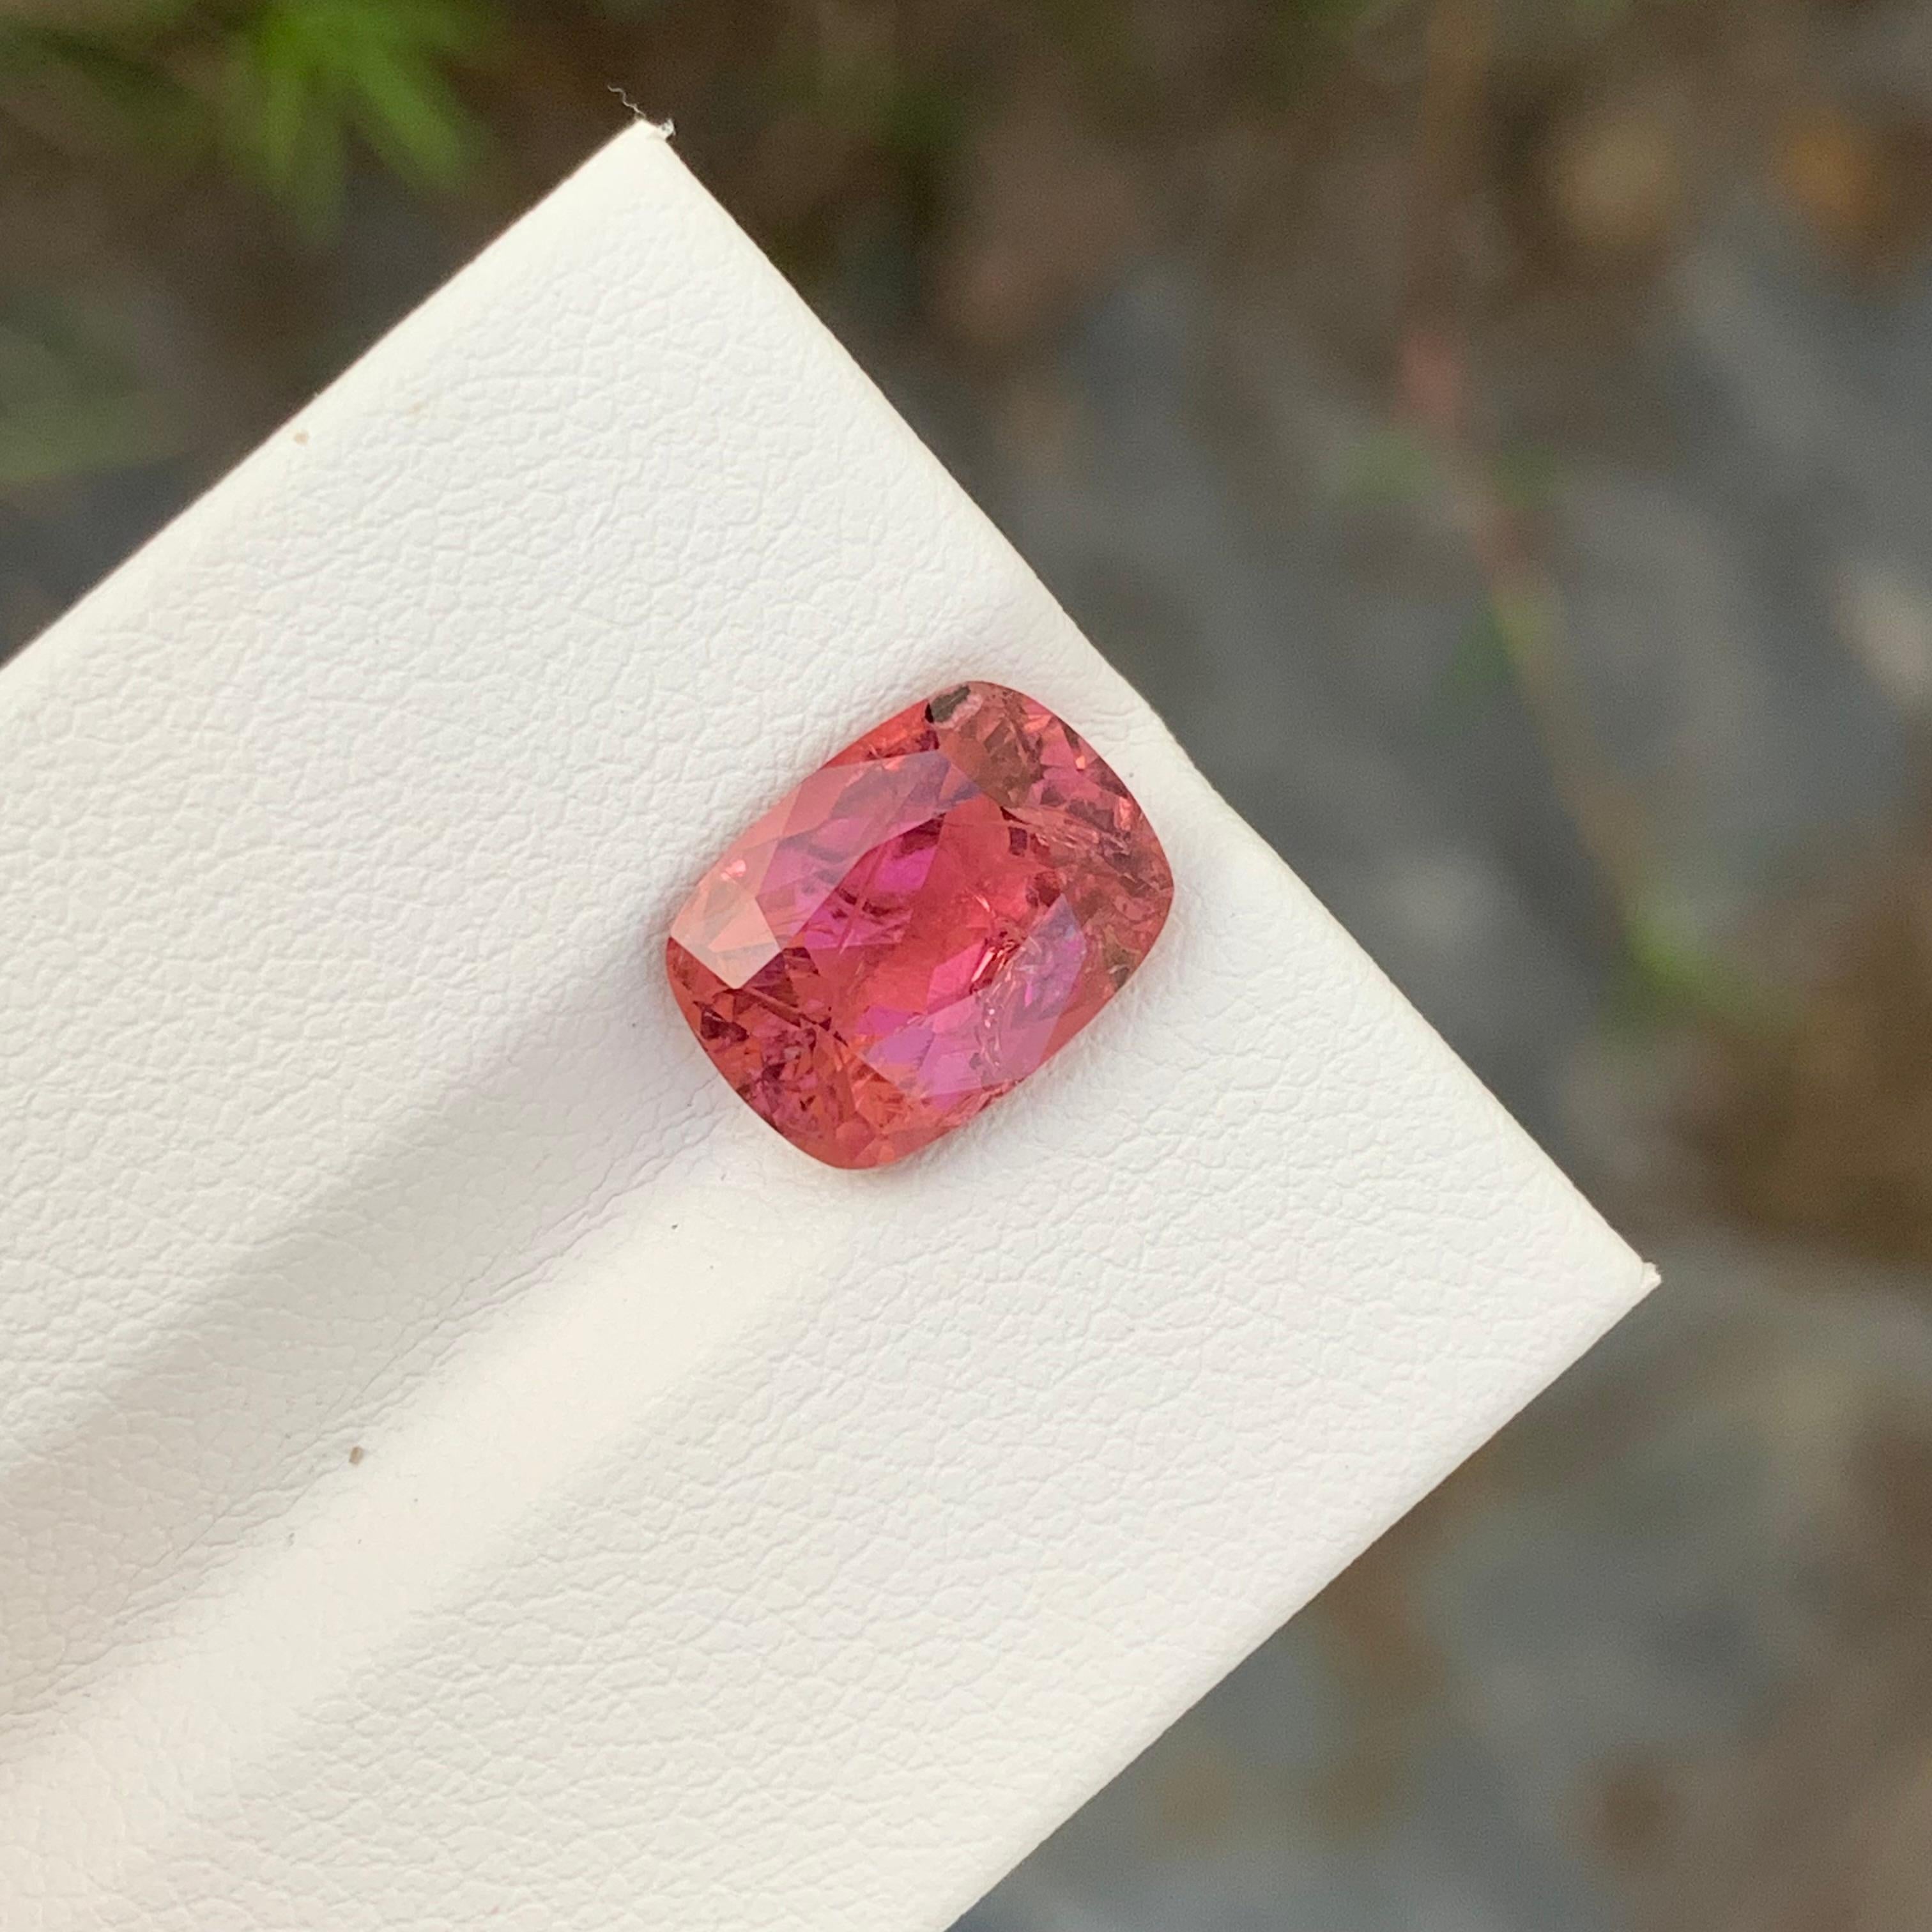 3.20 Carat Faceted Rubellite Tourmaline Cushion Shape Gem From Africa  For Sale 1